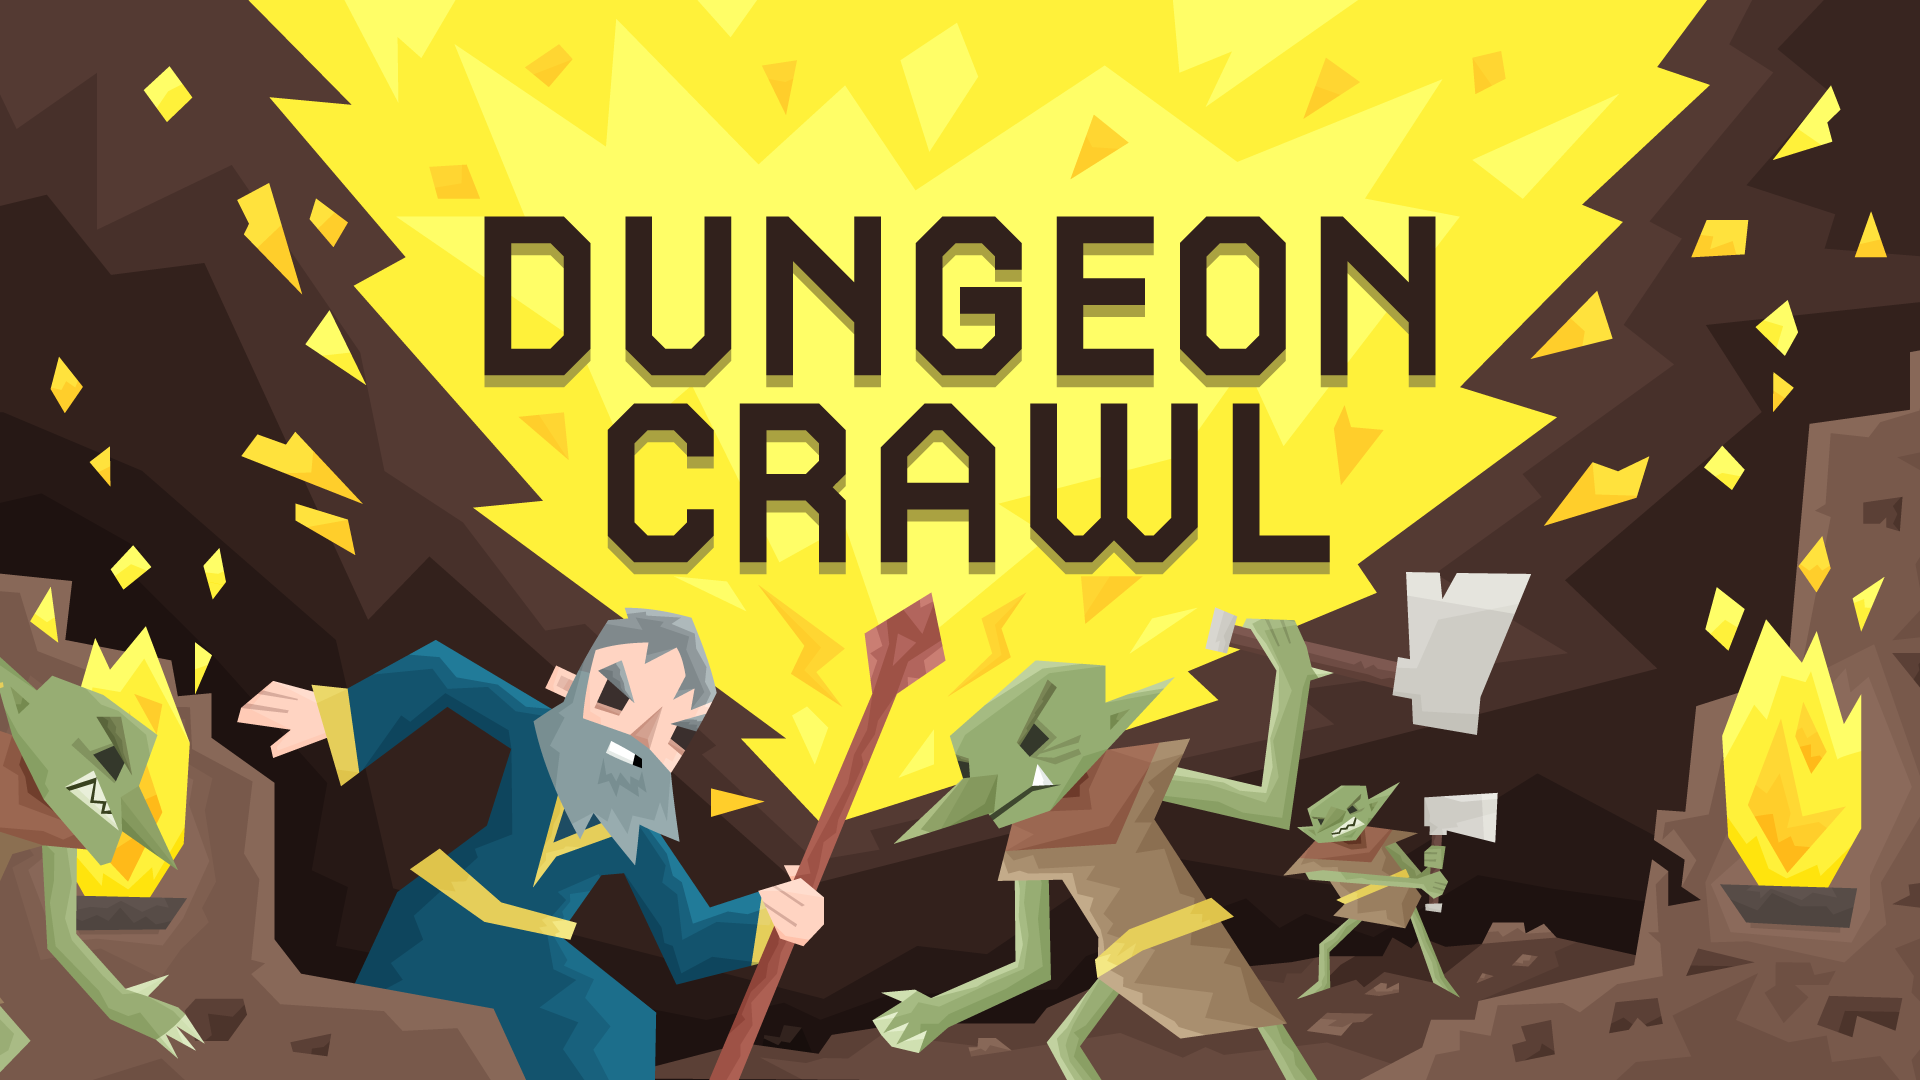 The Dungeon Crawl title.